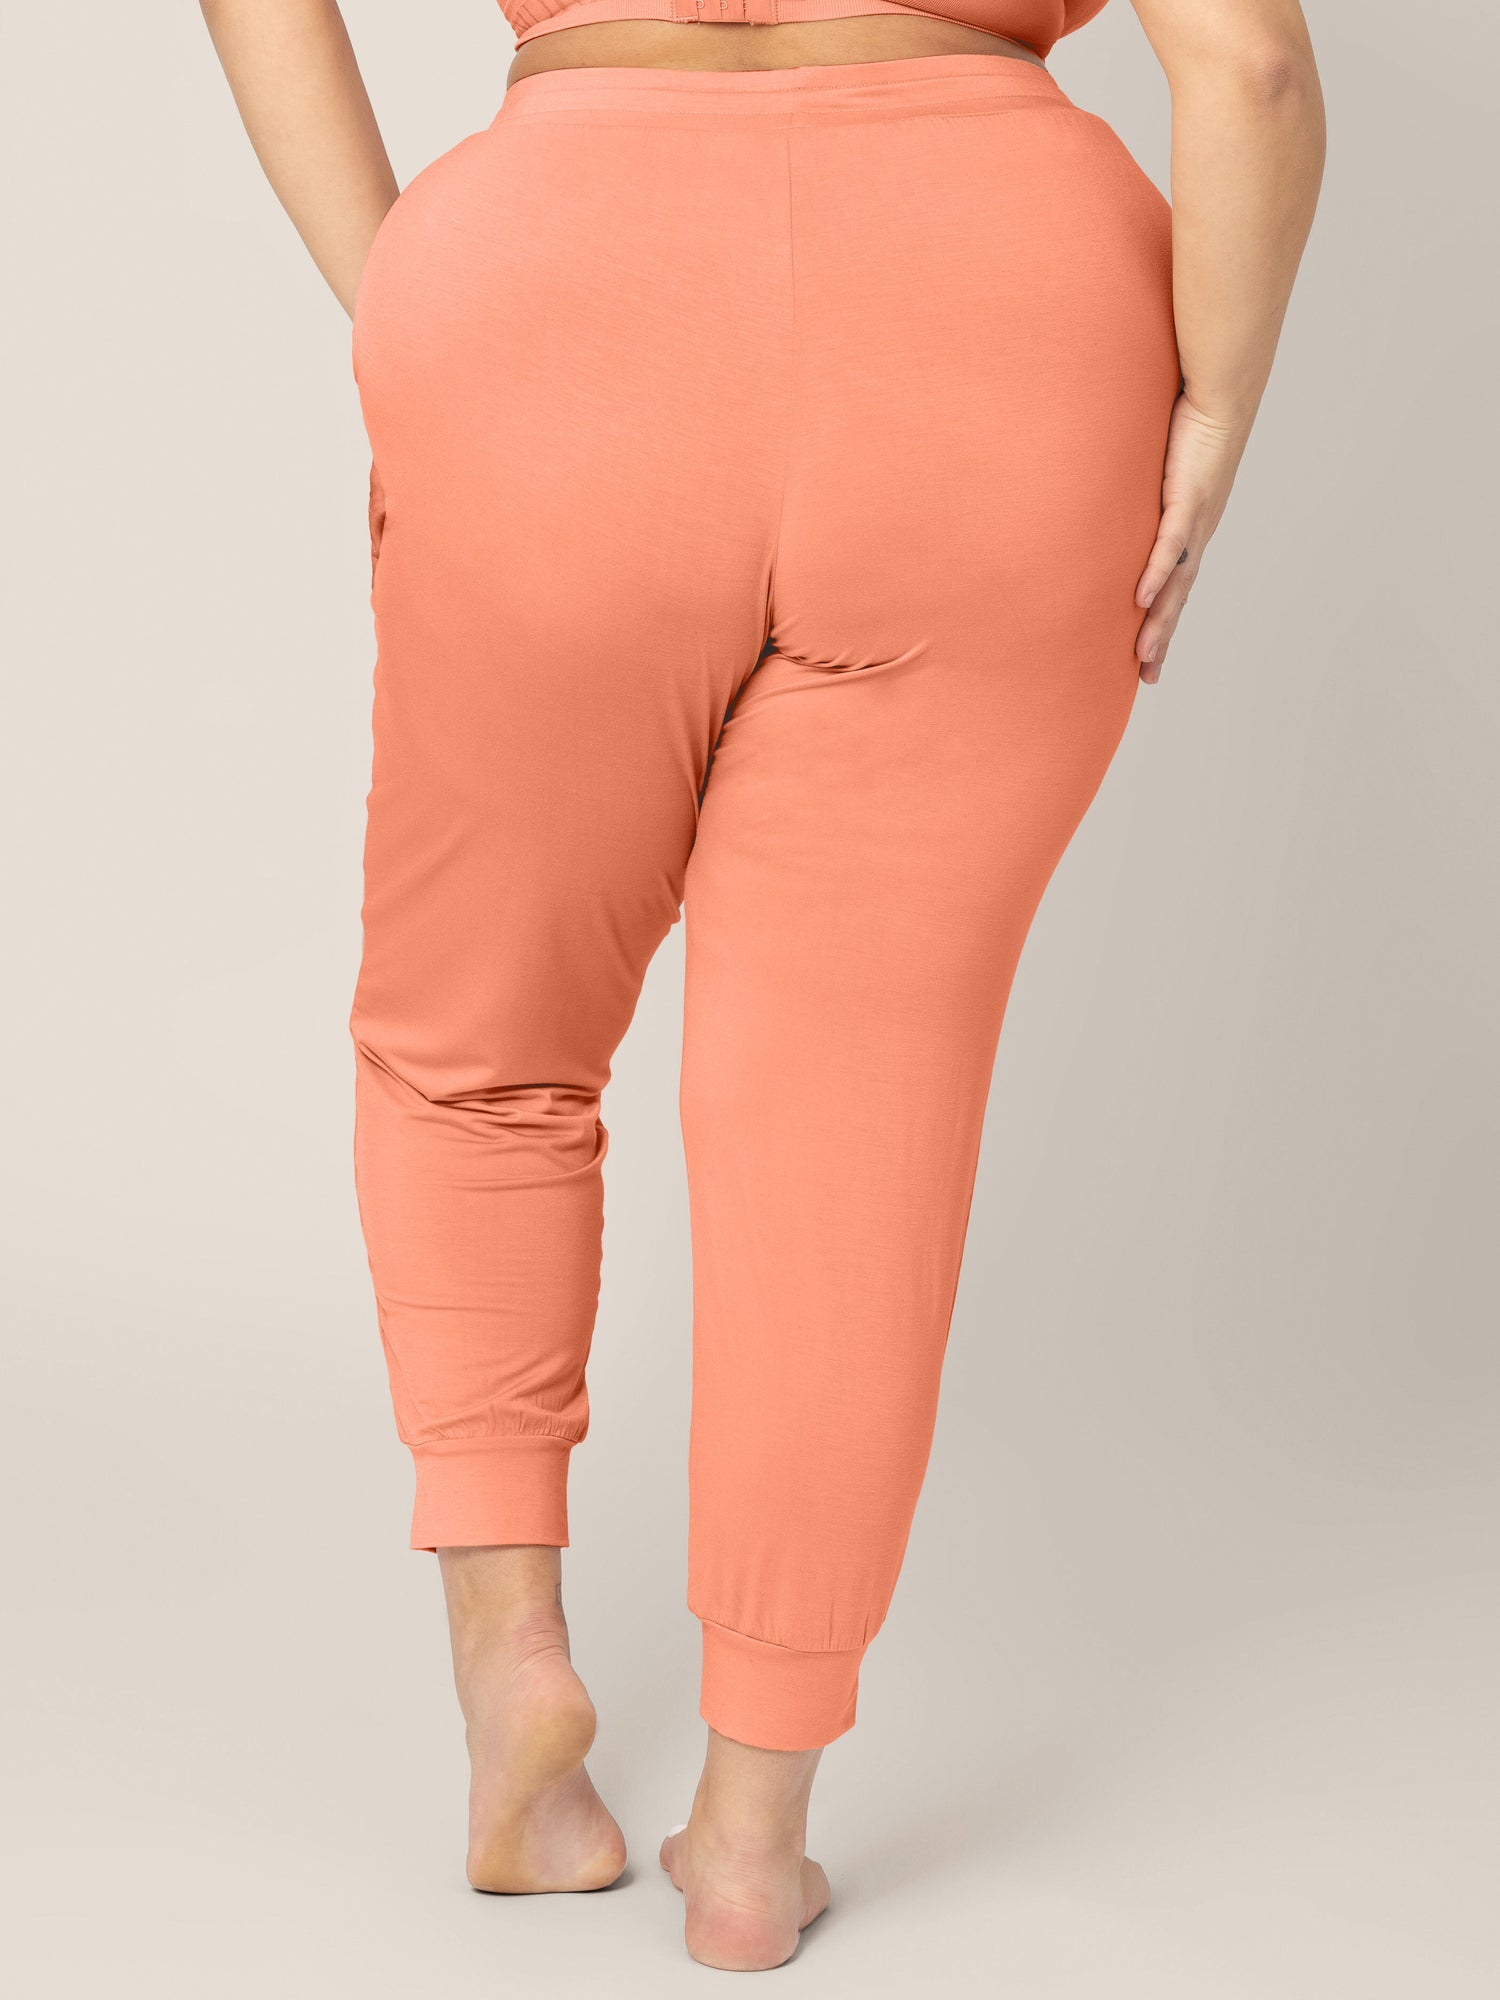 Back view of the bottom half of a model wearing the Everyday Lounge Joggers in Vintage Coral